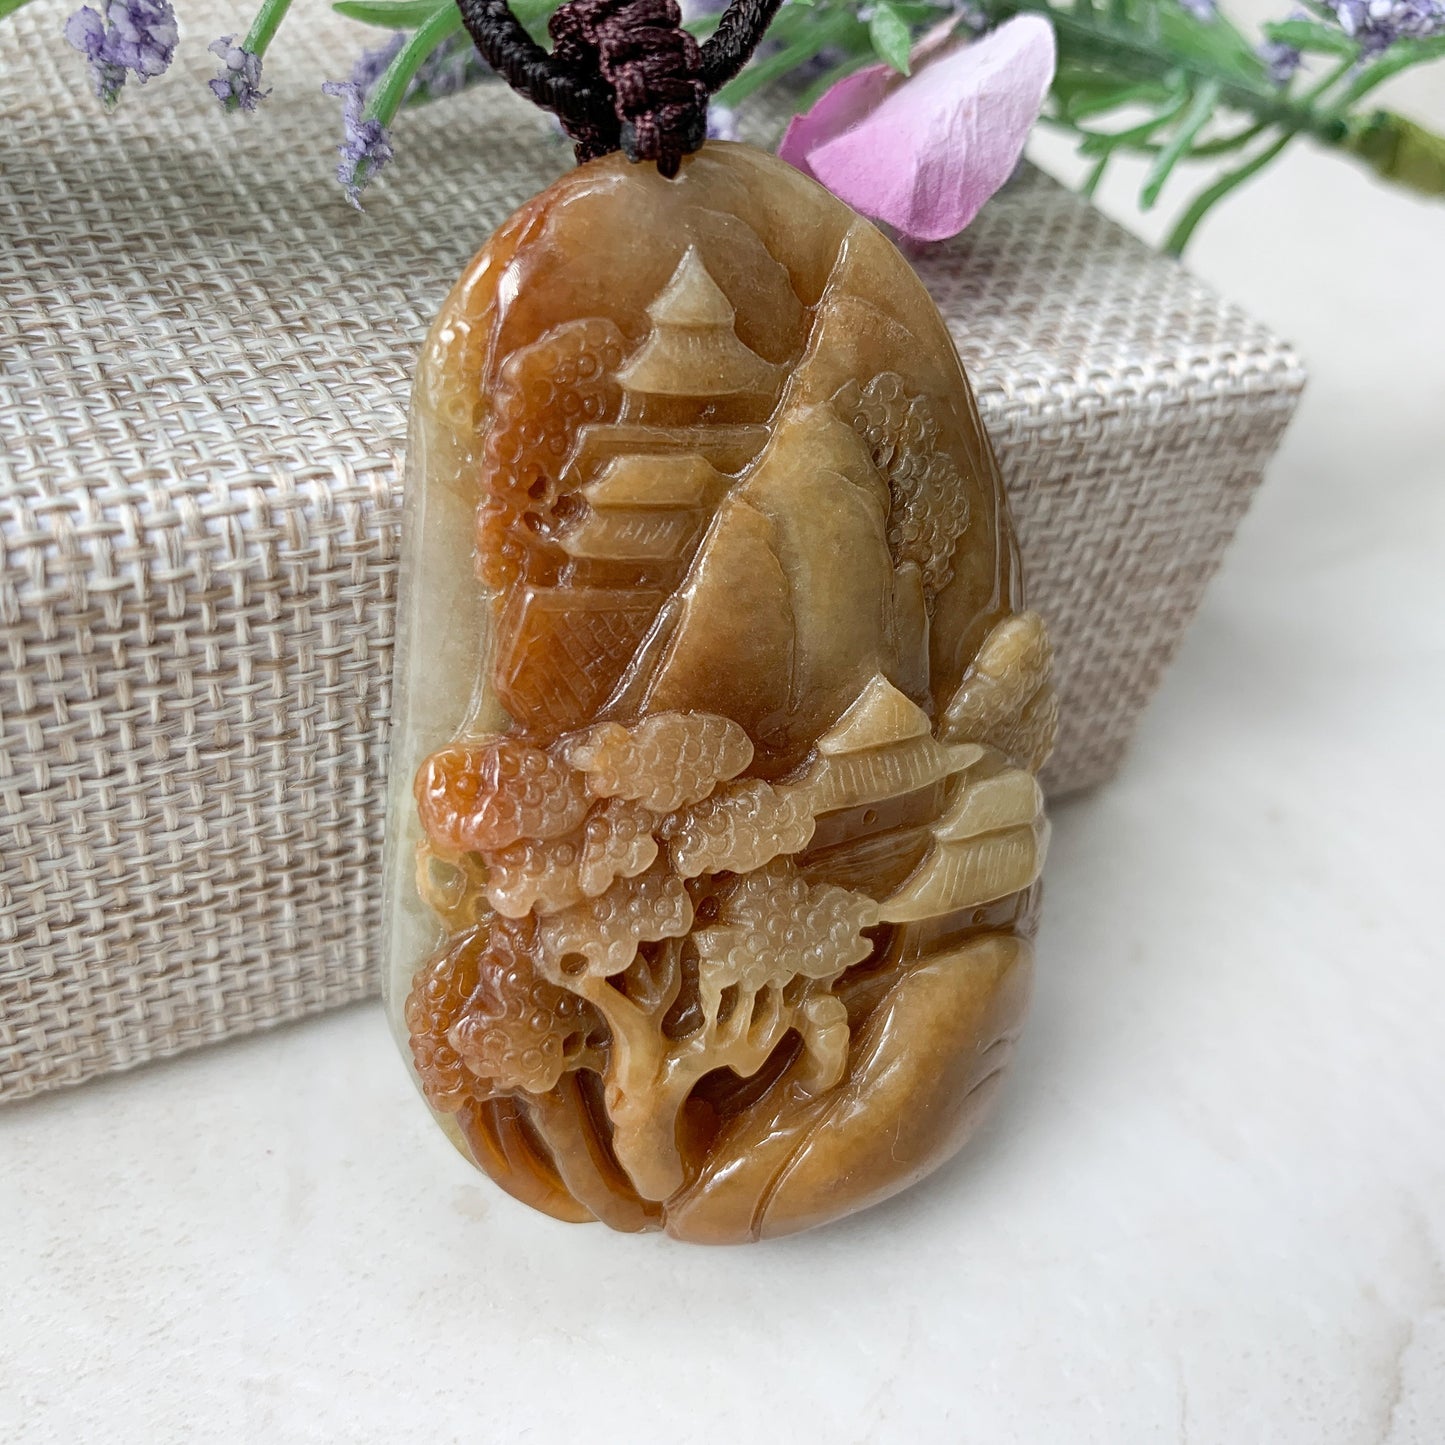 Jadeite Jade Yellow and Red Landscape Mountain Forest River Scenery Hand Carved Pendant Necklace, YJ-0321-0327782 - AriaDesignCollection